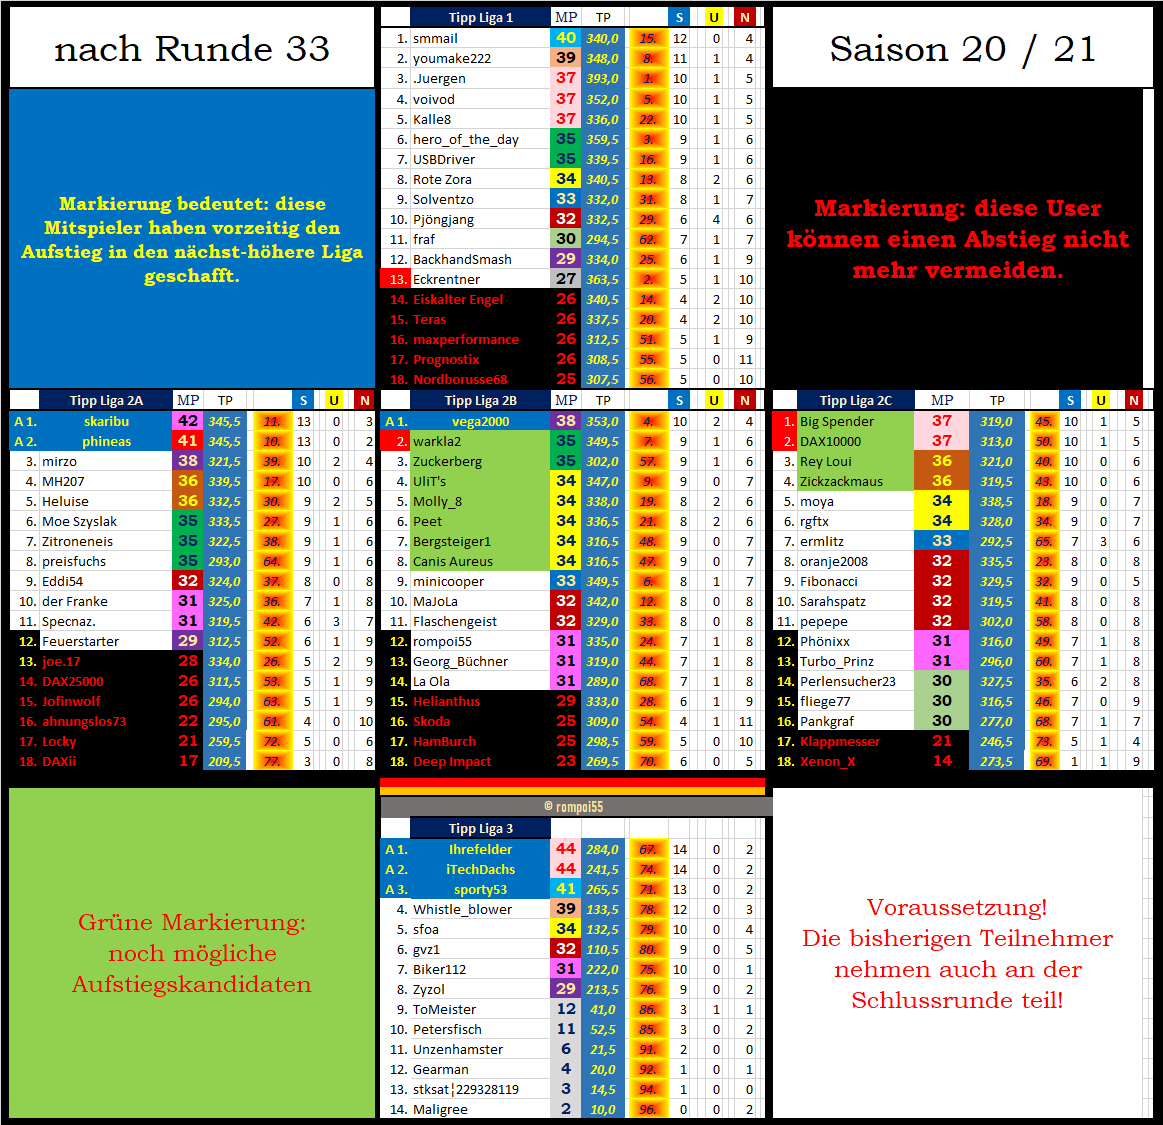 tabelle_nach_runde_33.png